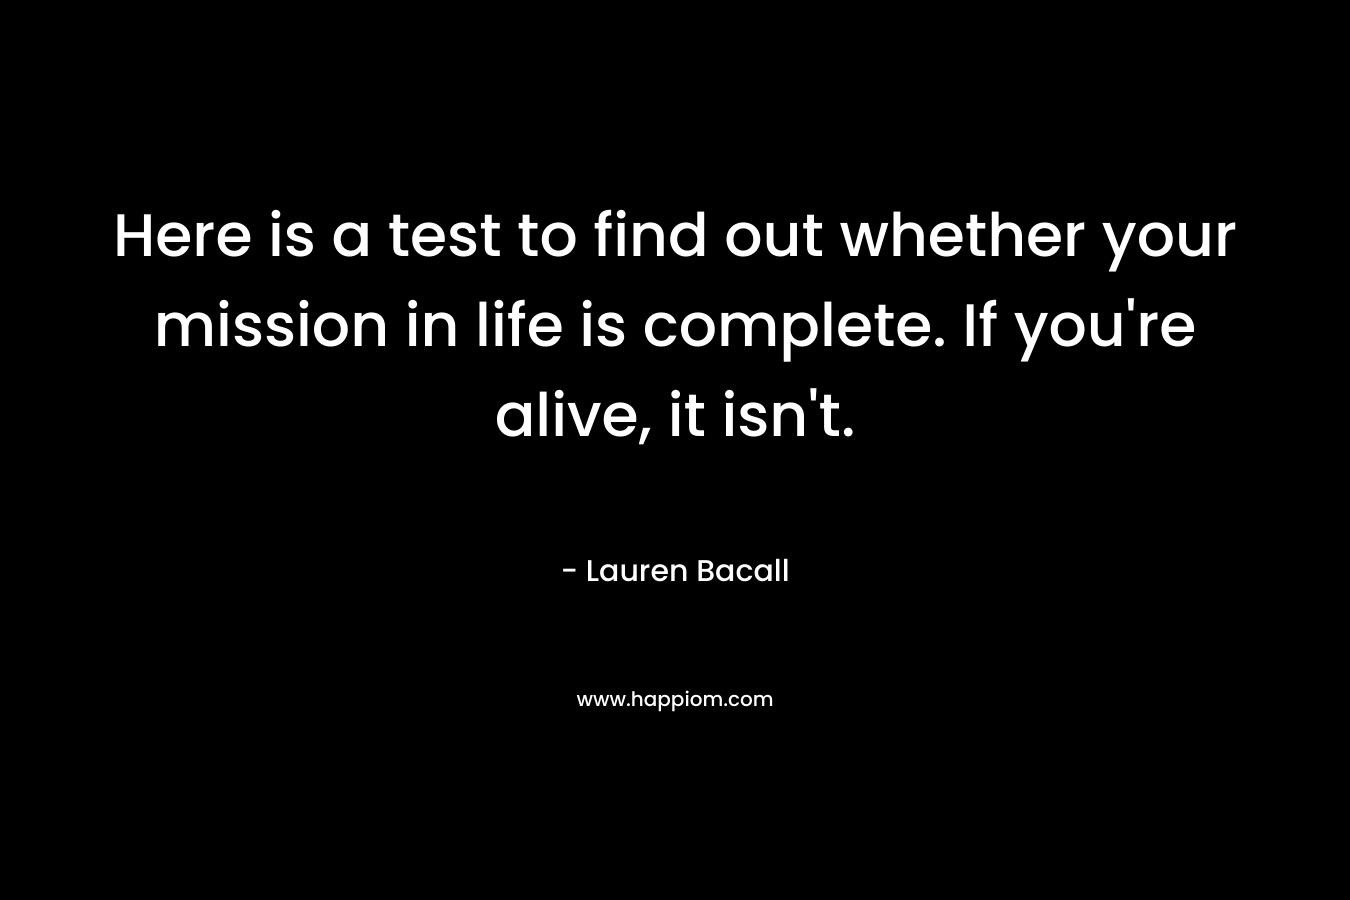 Here is a test to find out whether your mission in life is complete. If you're alive, it isn't.